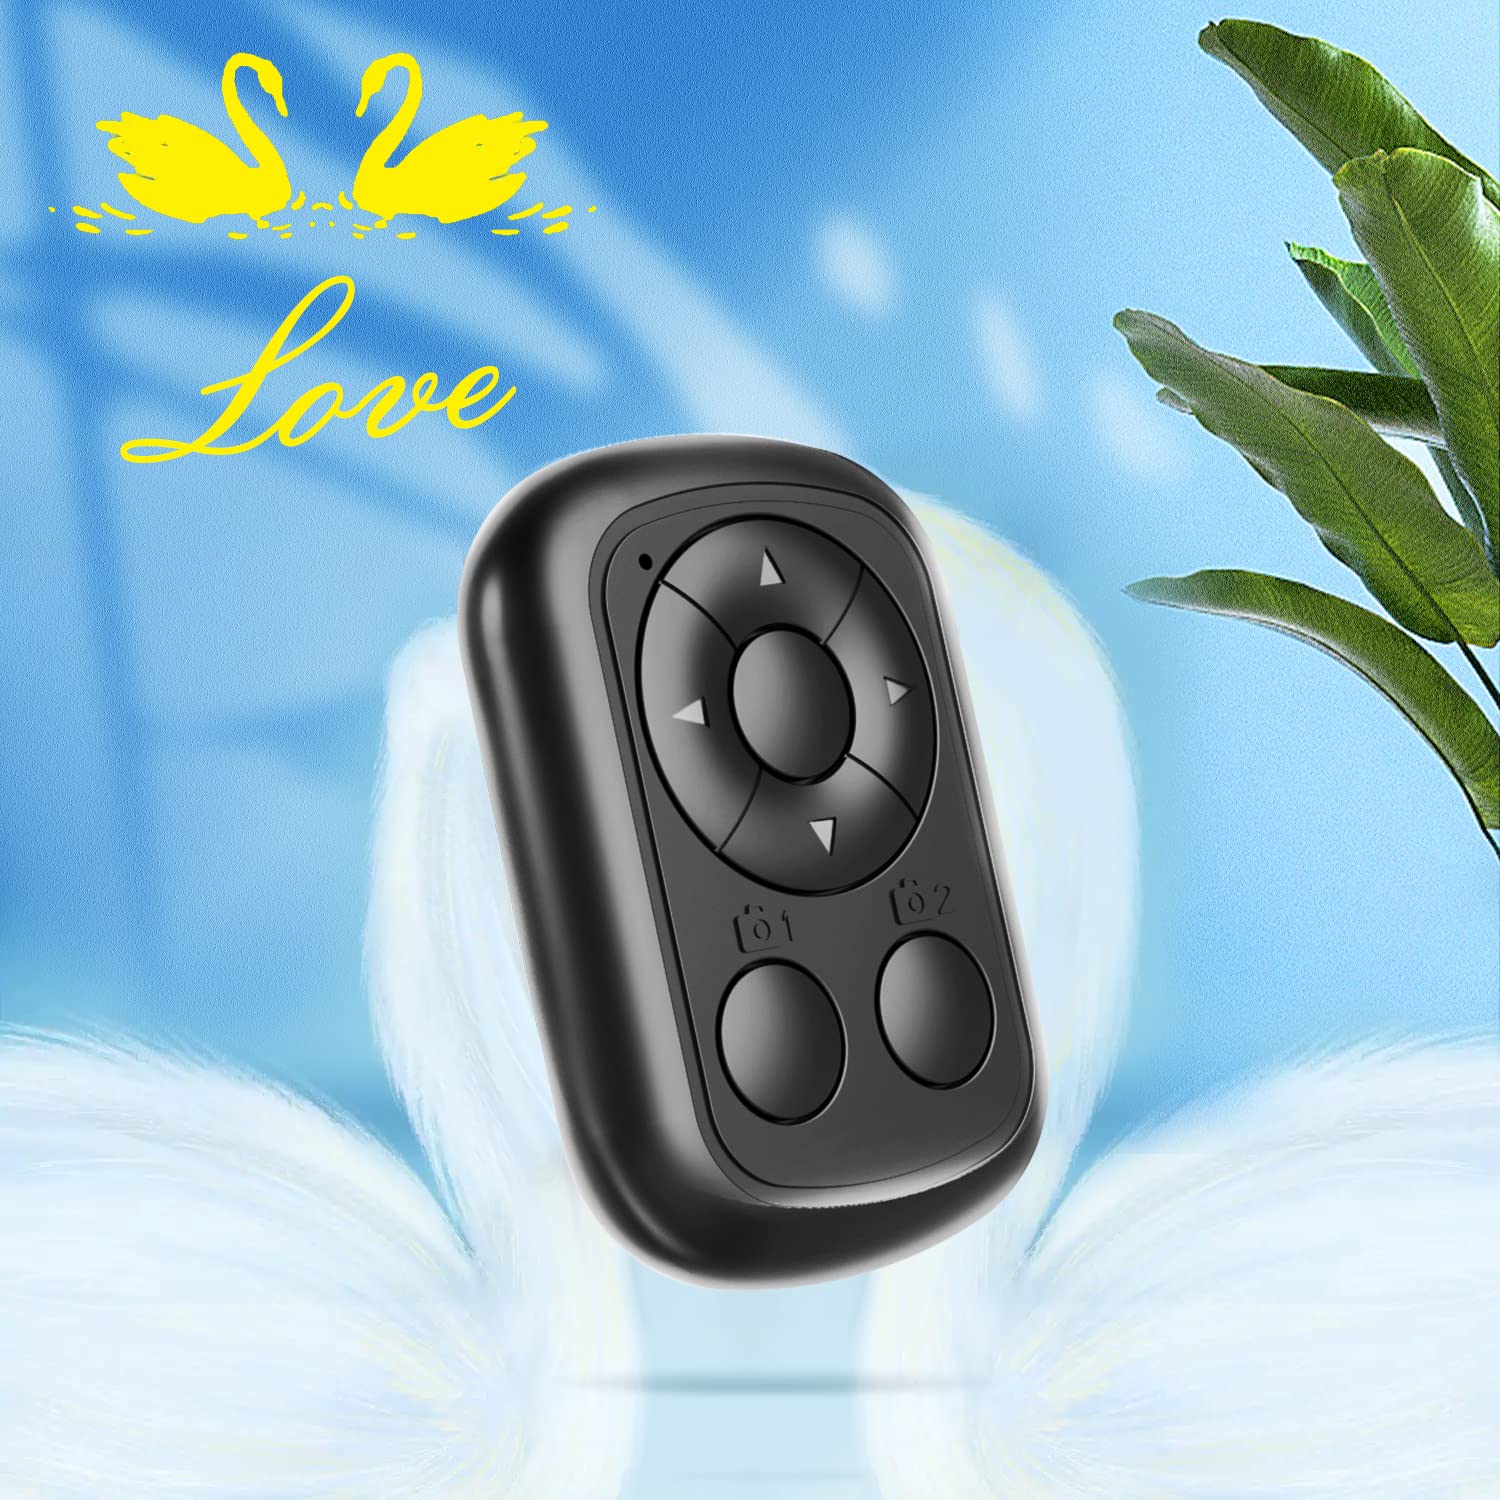 TIK TOK Bluetooth Remote Control,Kindle App Bluetooth Scrolling Page Turner for iPhone iPad Android, Camera Shutter Remote Control, 7 Buttons Support Tiktok Video Recording/Play/Pause/Give a Like